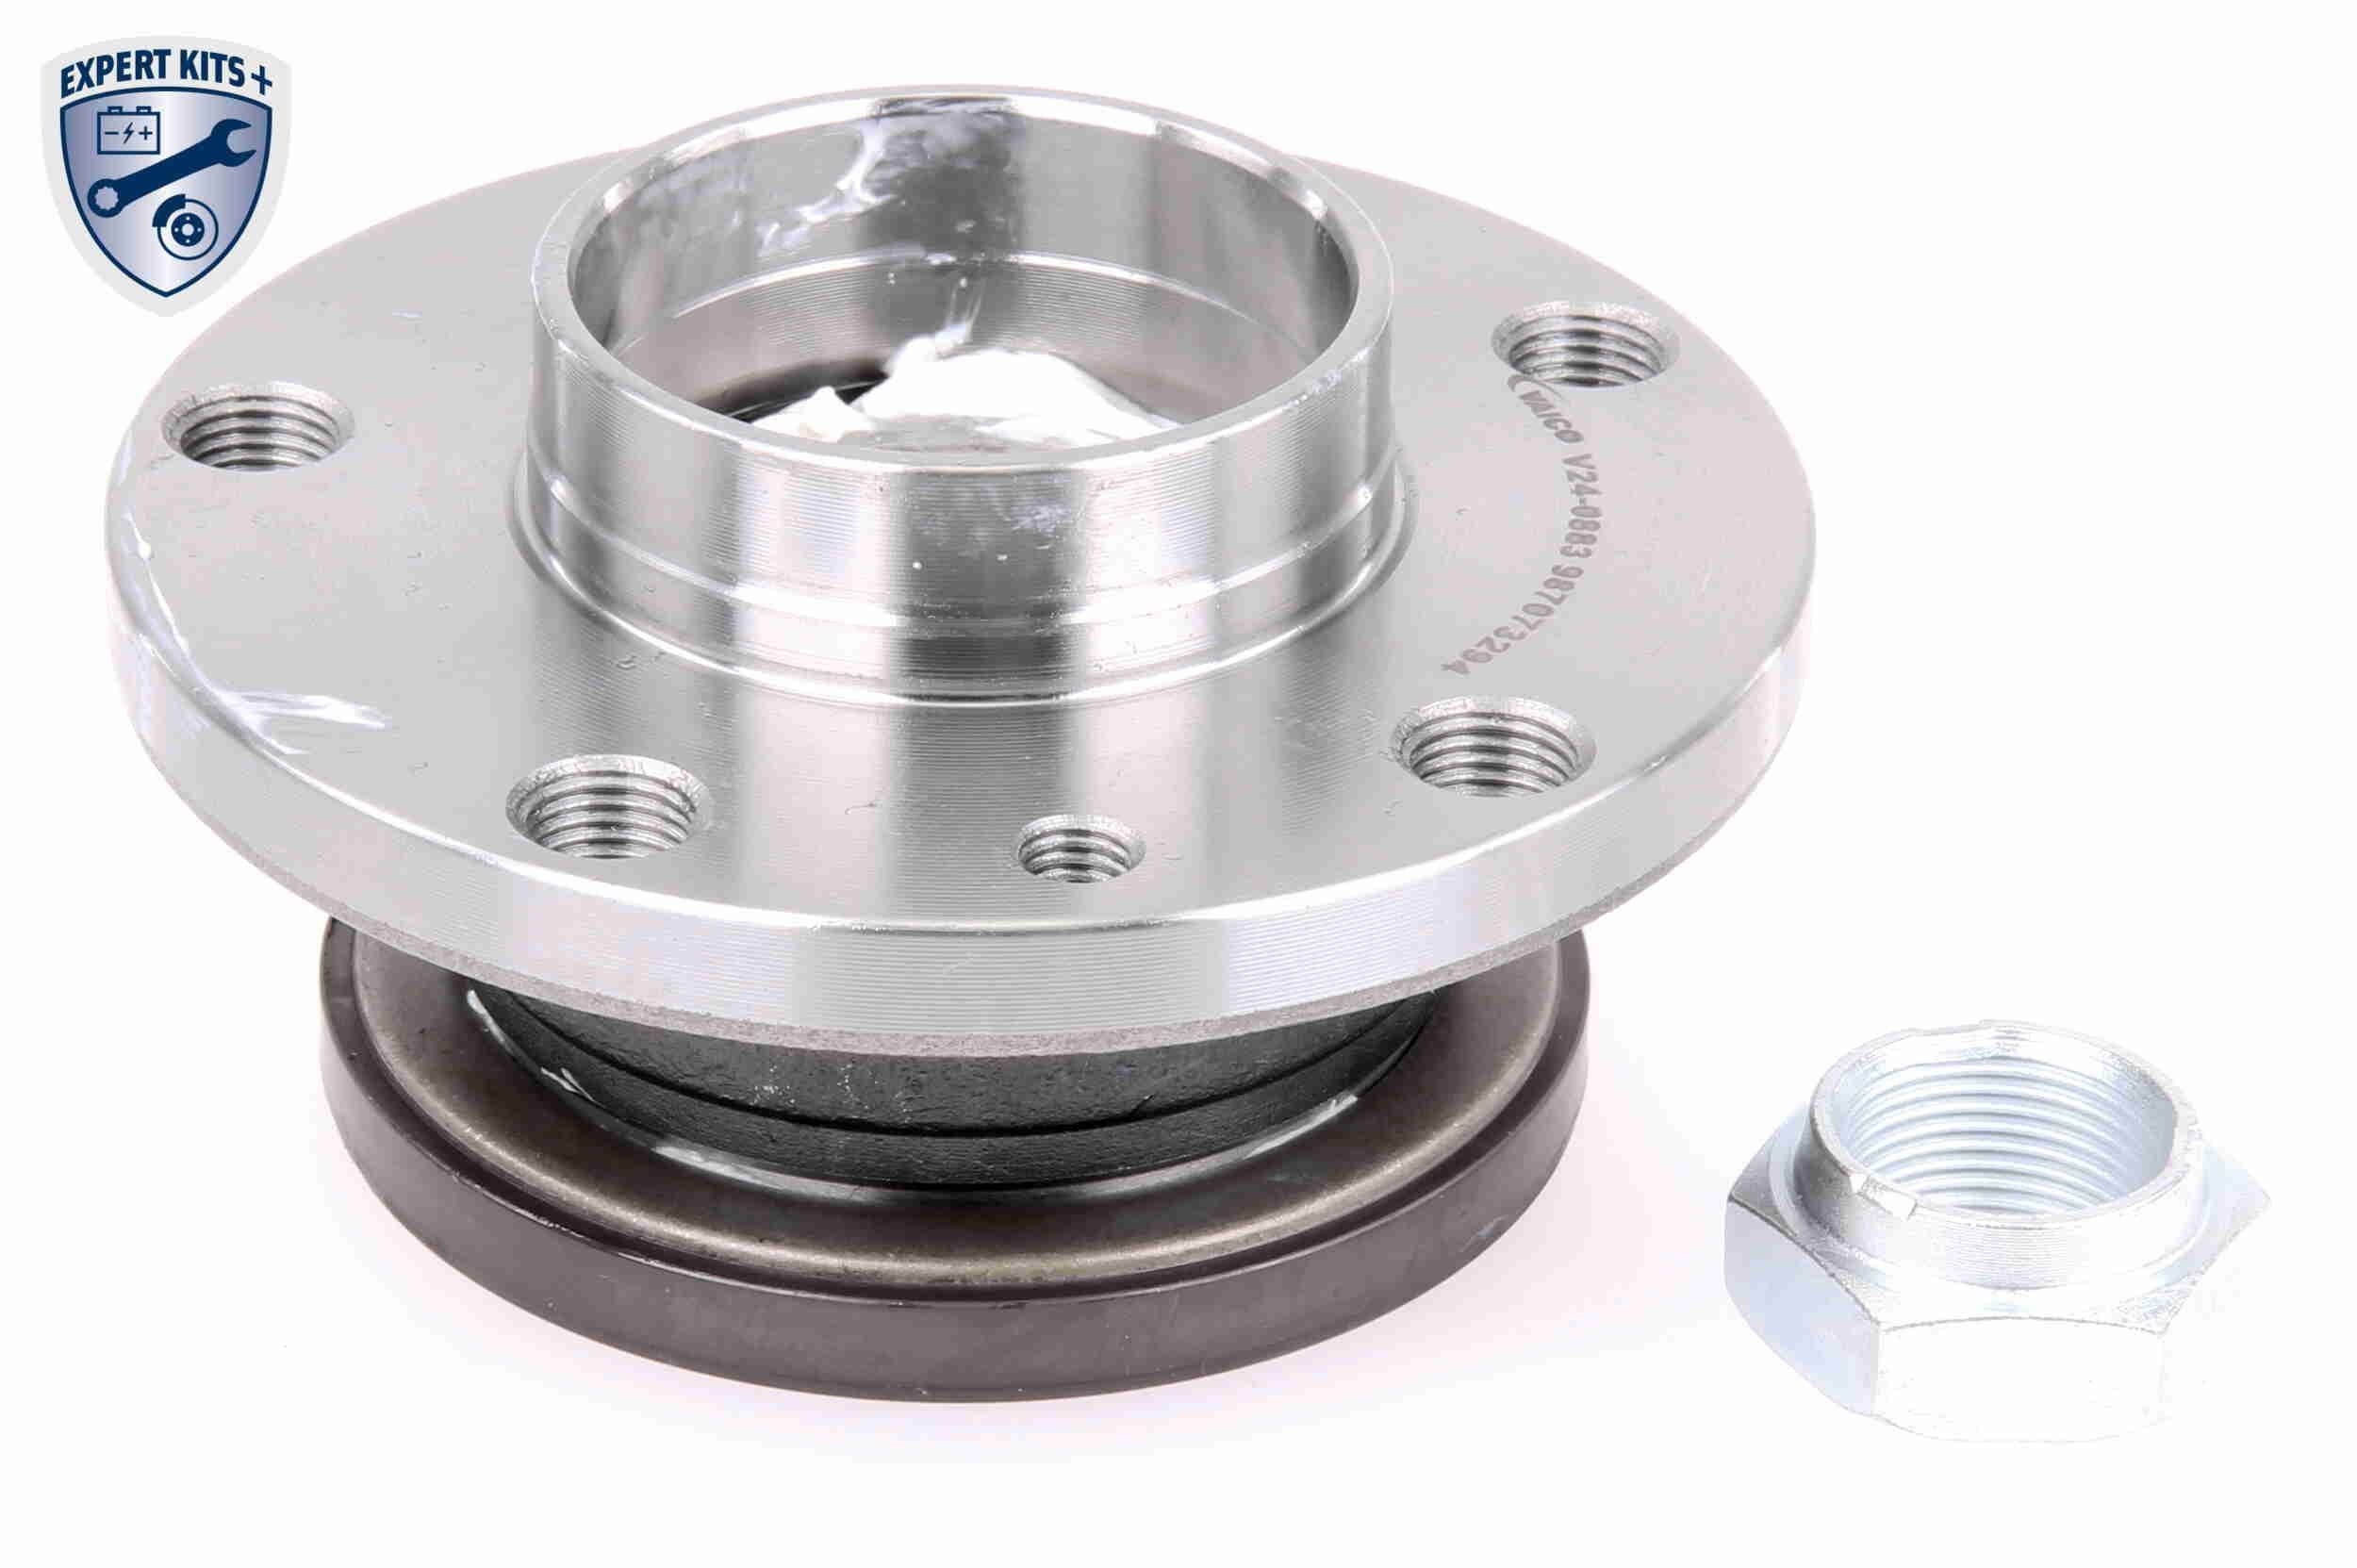 VAICO V24-0883 Wheel bearing kit Front Axle, Rear Axle, EXPERT KITS +, with integrated magnetic sensor ring, 116,5 mm